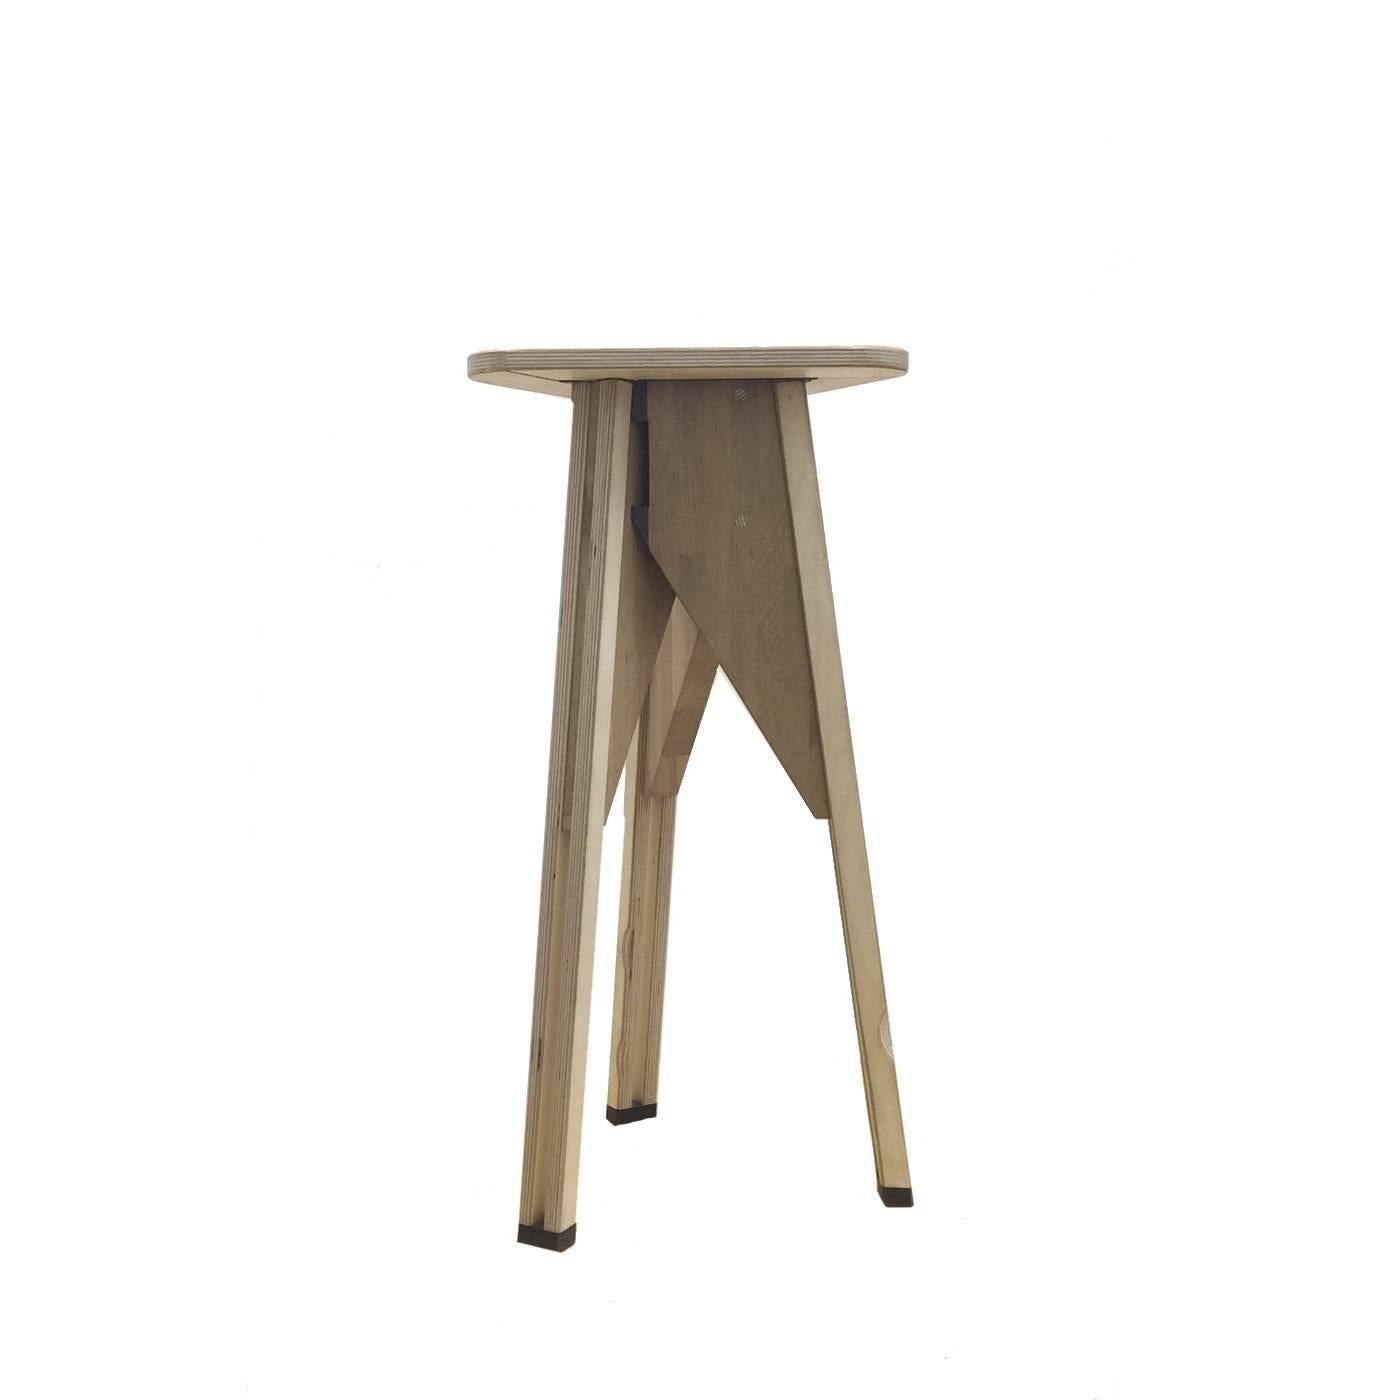 Part of the LW series, this striking stool can stand alone or be combined with others from the same collection to add touches of modern sophistication to any room. This tall piece can be used as a high stool, side table or planter and its given its